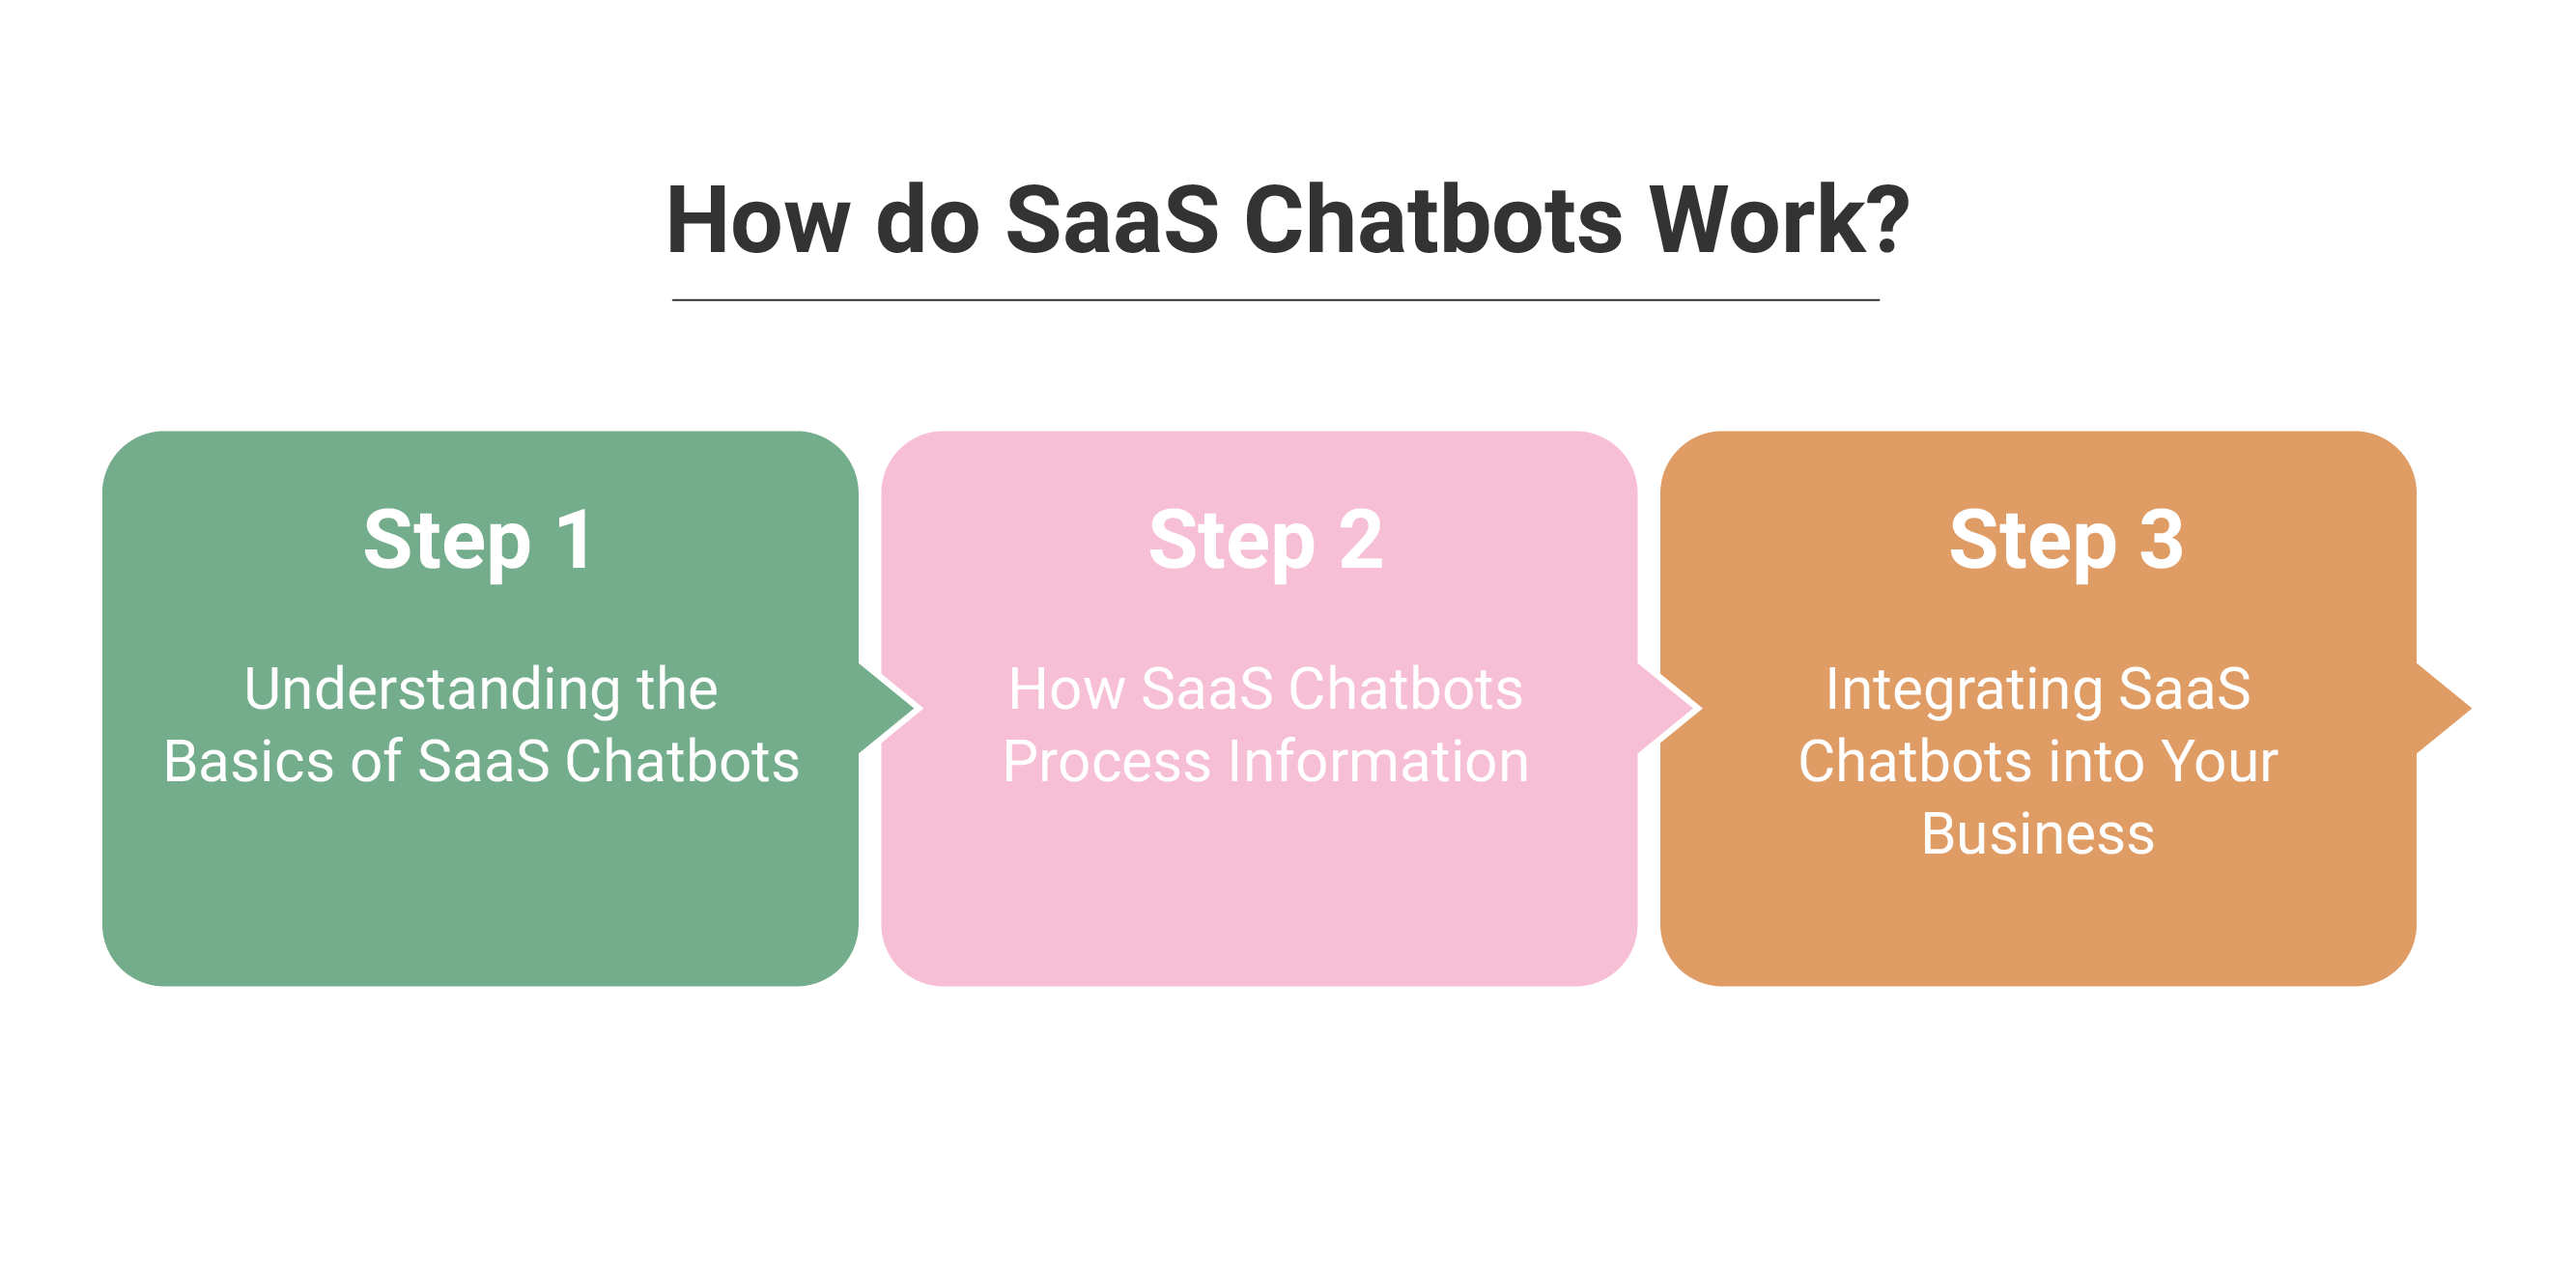 How do SaaS Chatbots Work?